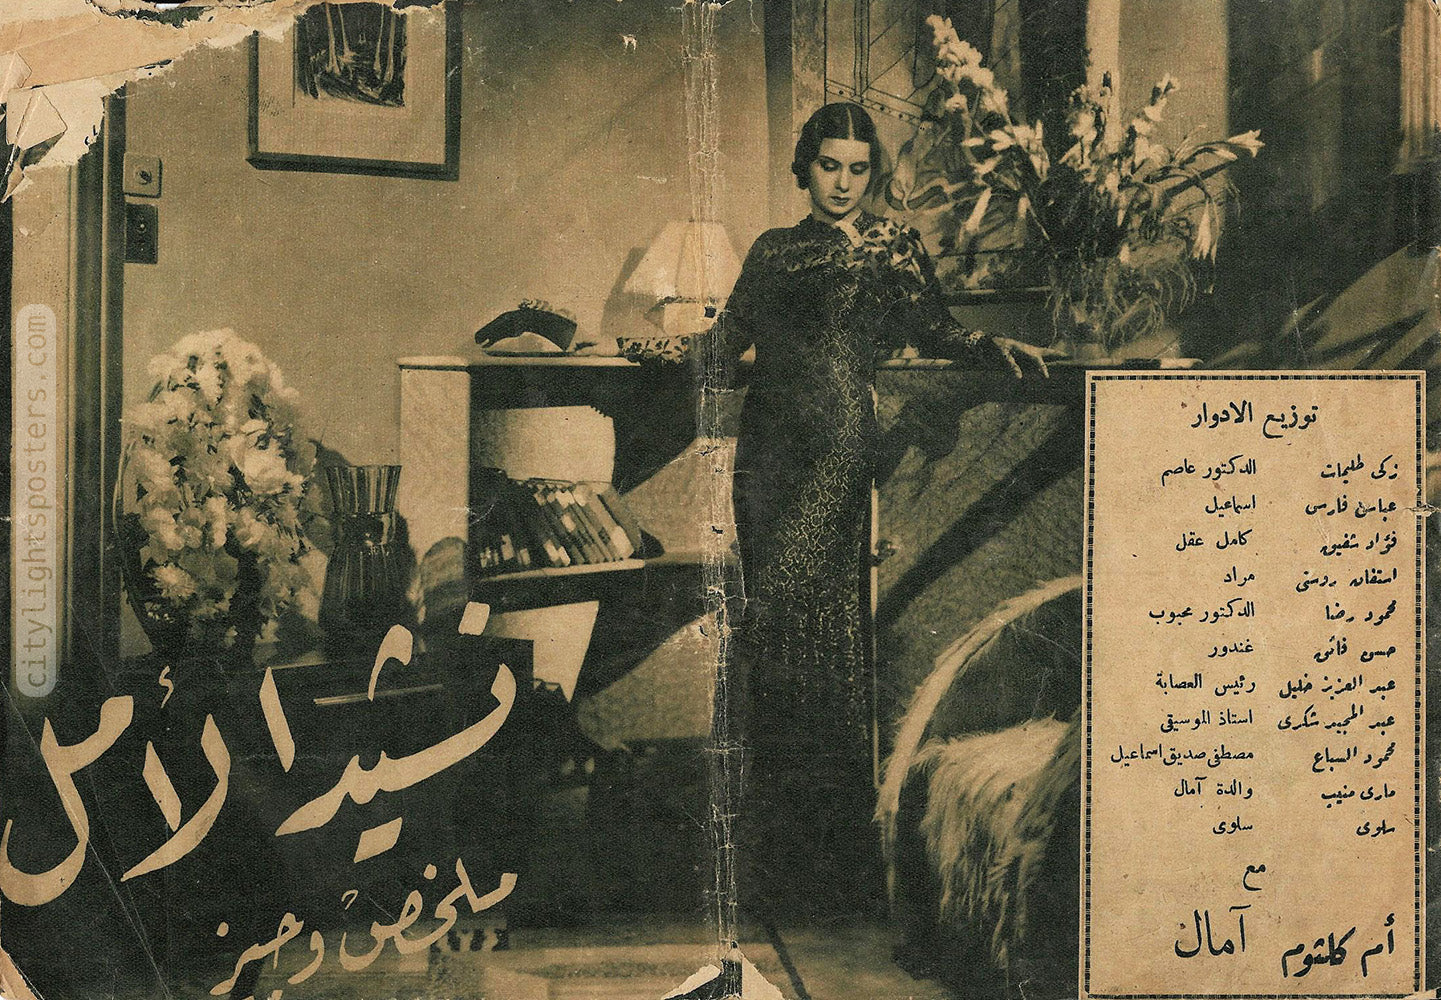 Young Umm Kulthum on the booklet cover of The Chant of Hope (1937).